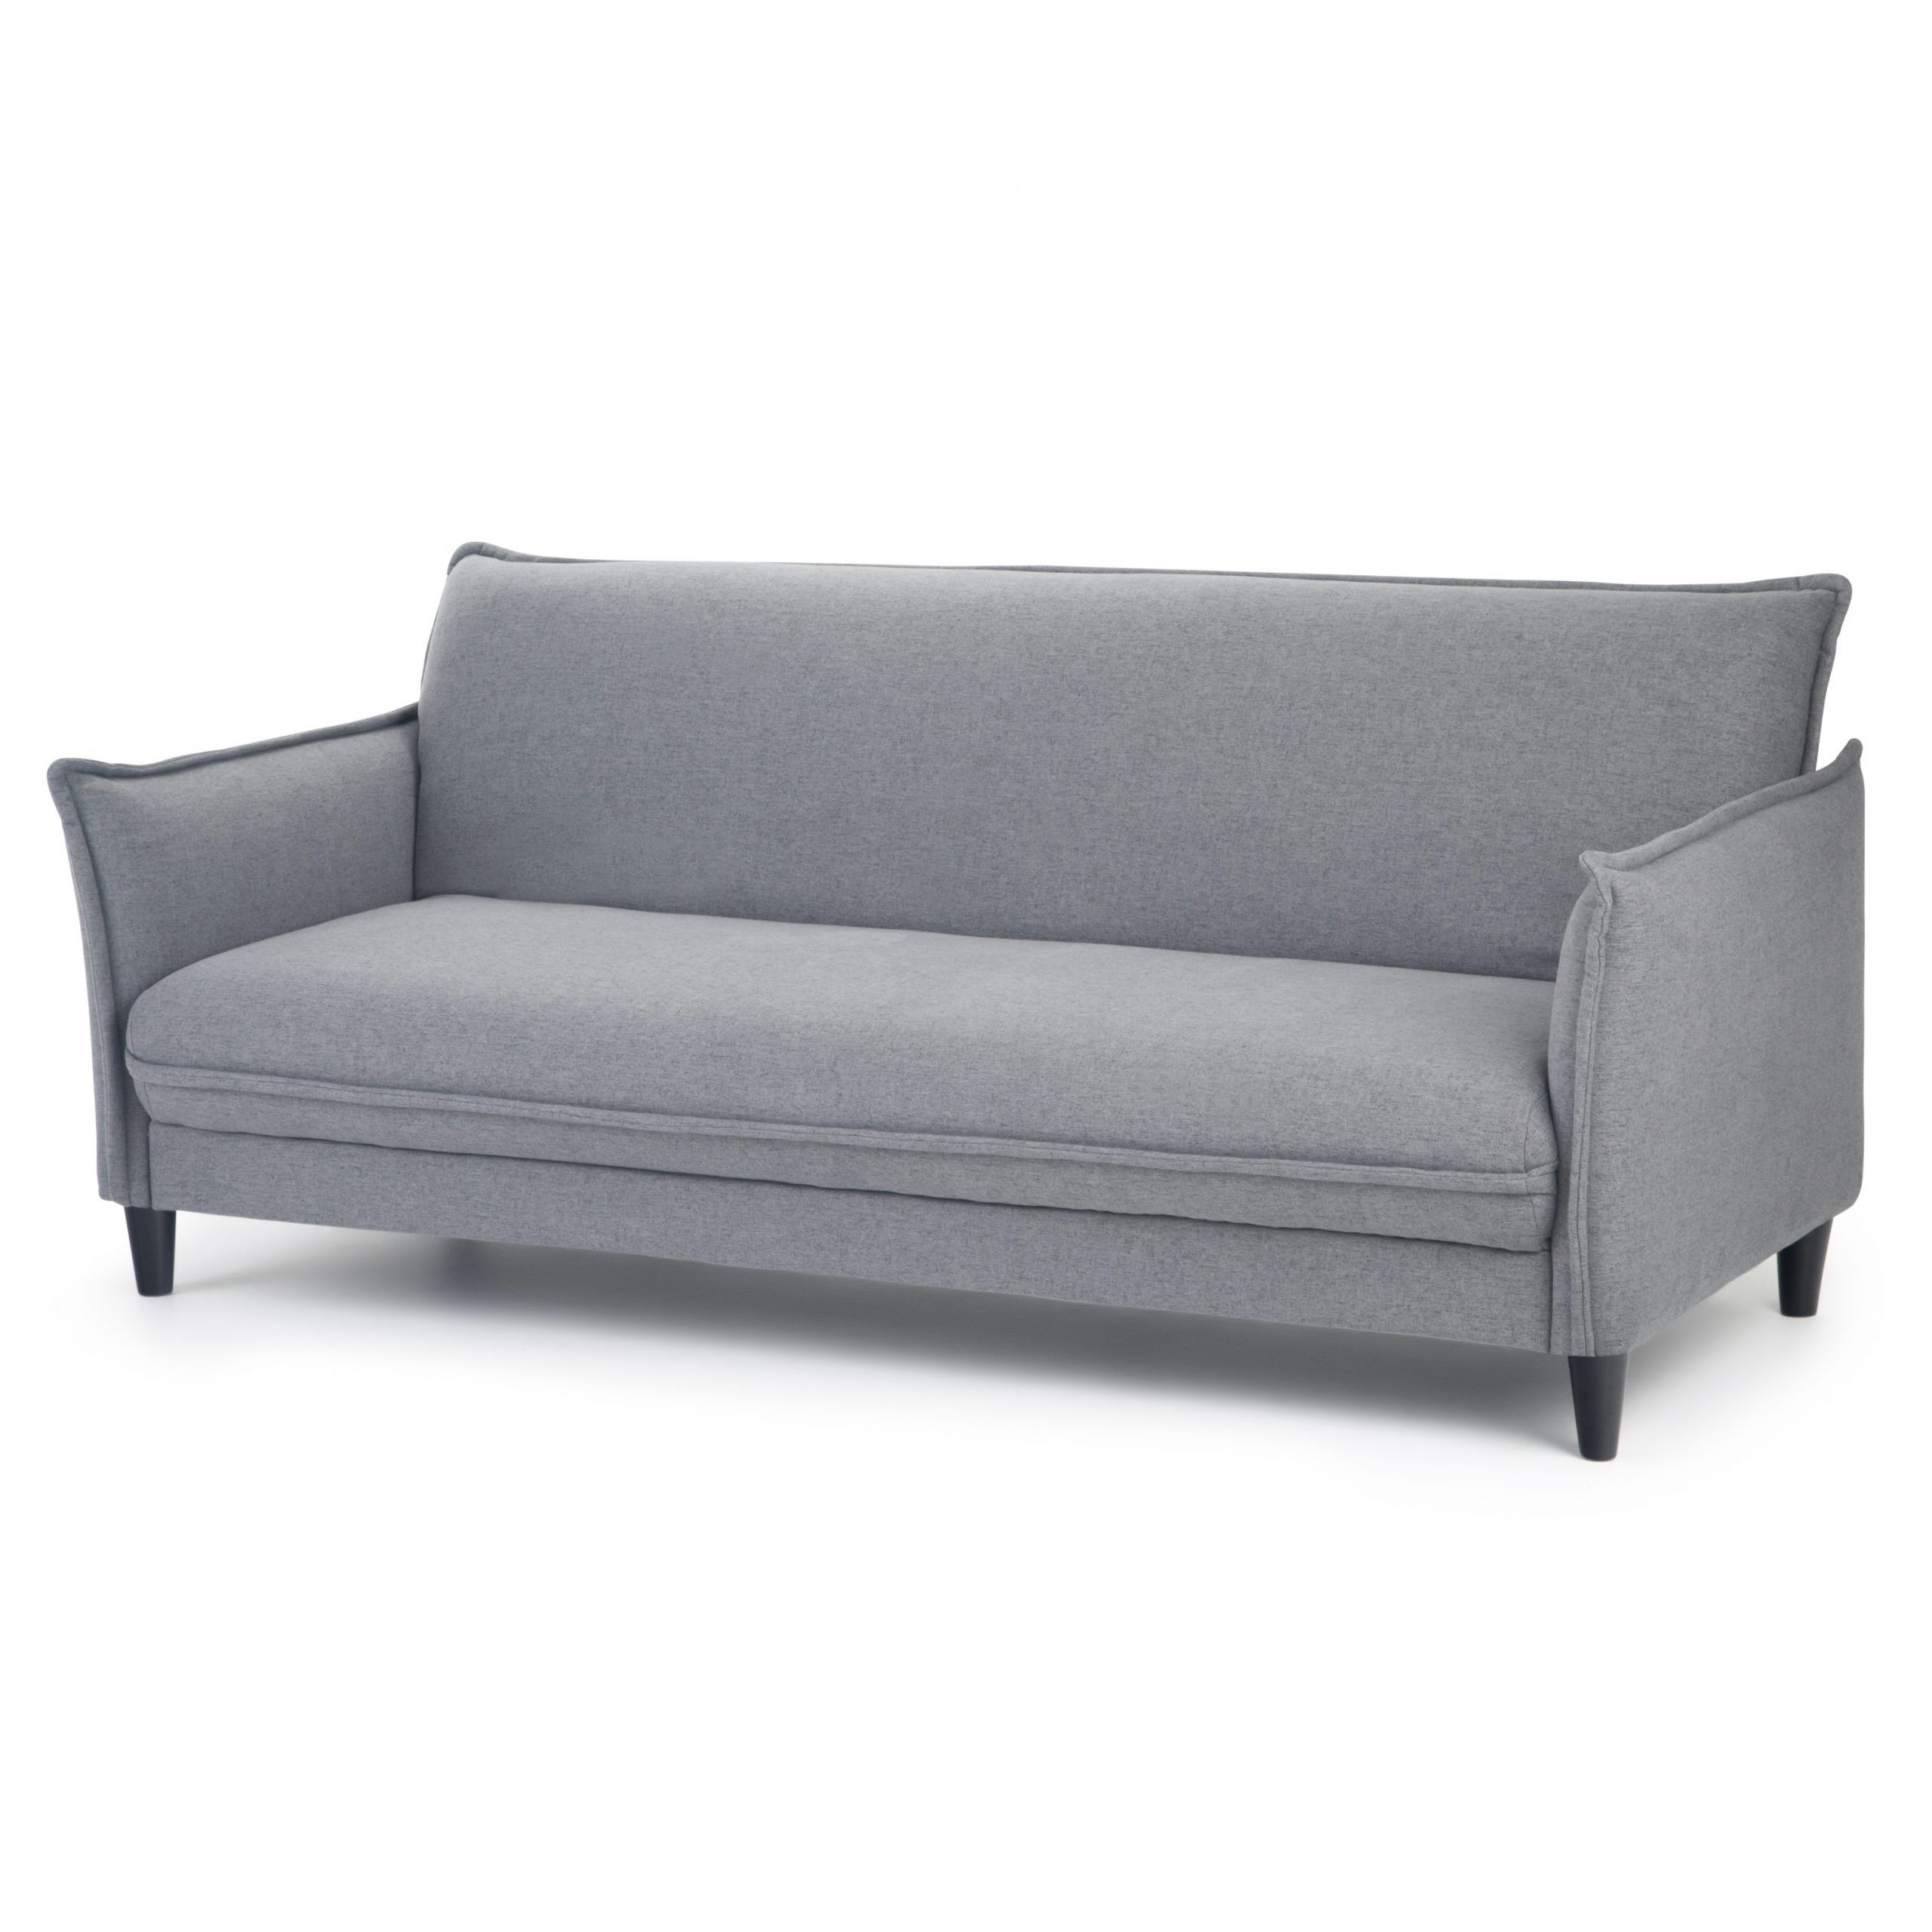 Brooklyn + Max Danville Contemporary 81 Inch Wide Sofa Bed For Gneiss Modern Linen Sectional Sofas Slate Gray (View 1 of 15)